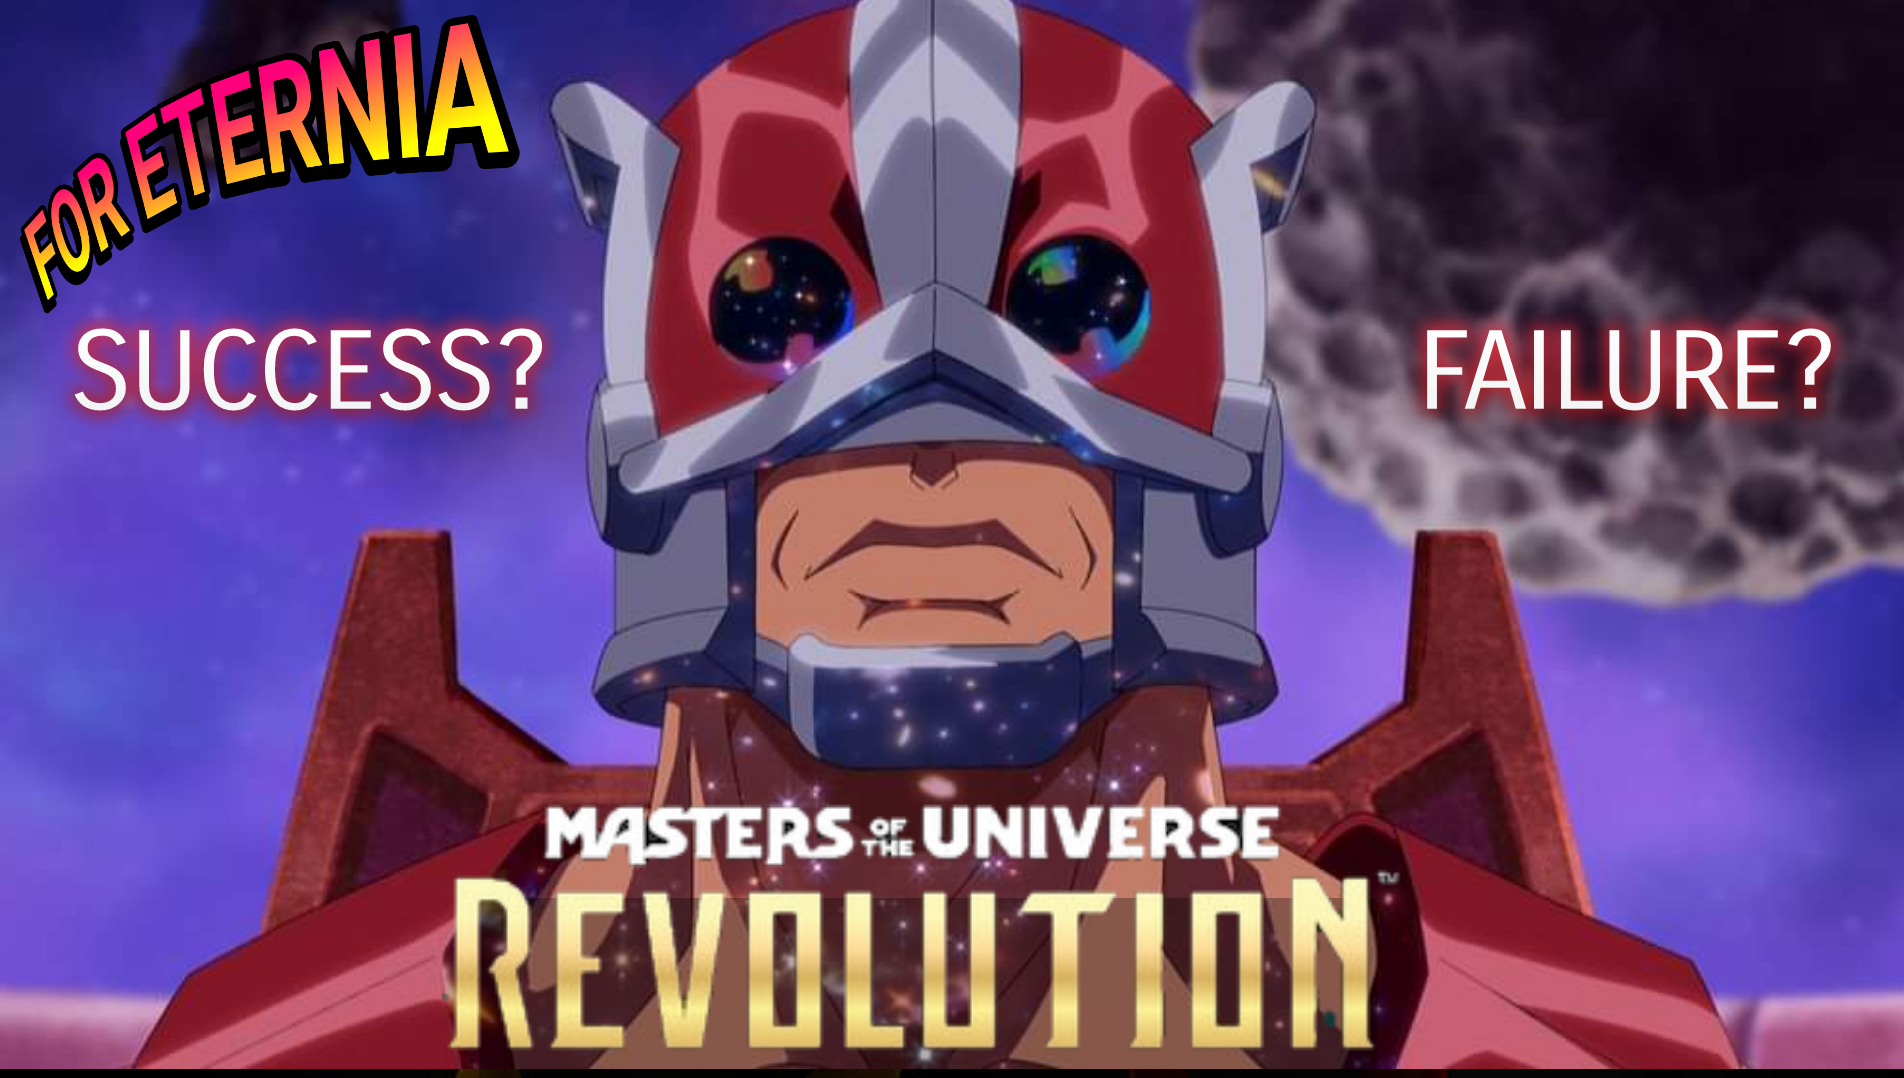 RATINGS SUCCESS OR FAILURE? Looking a little closer at the Top-10 performance of ”Masters of the Universe: Revolution”